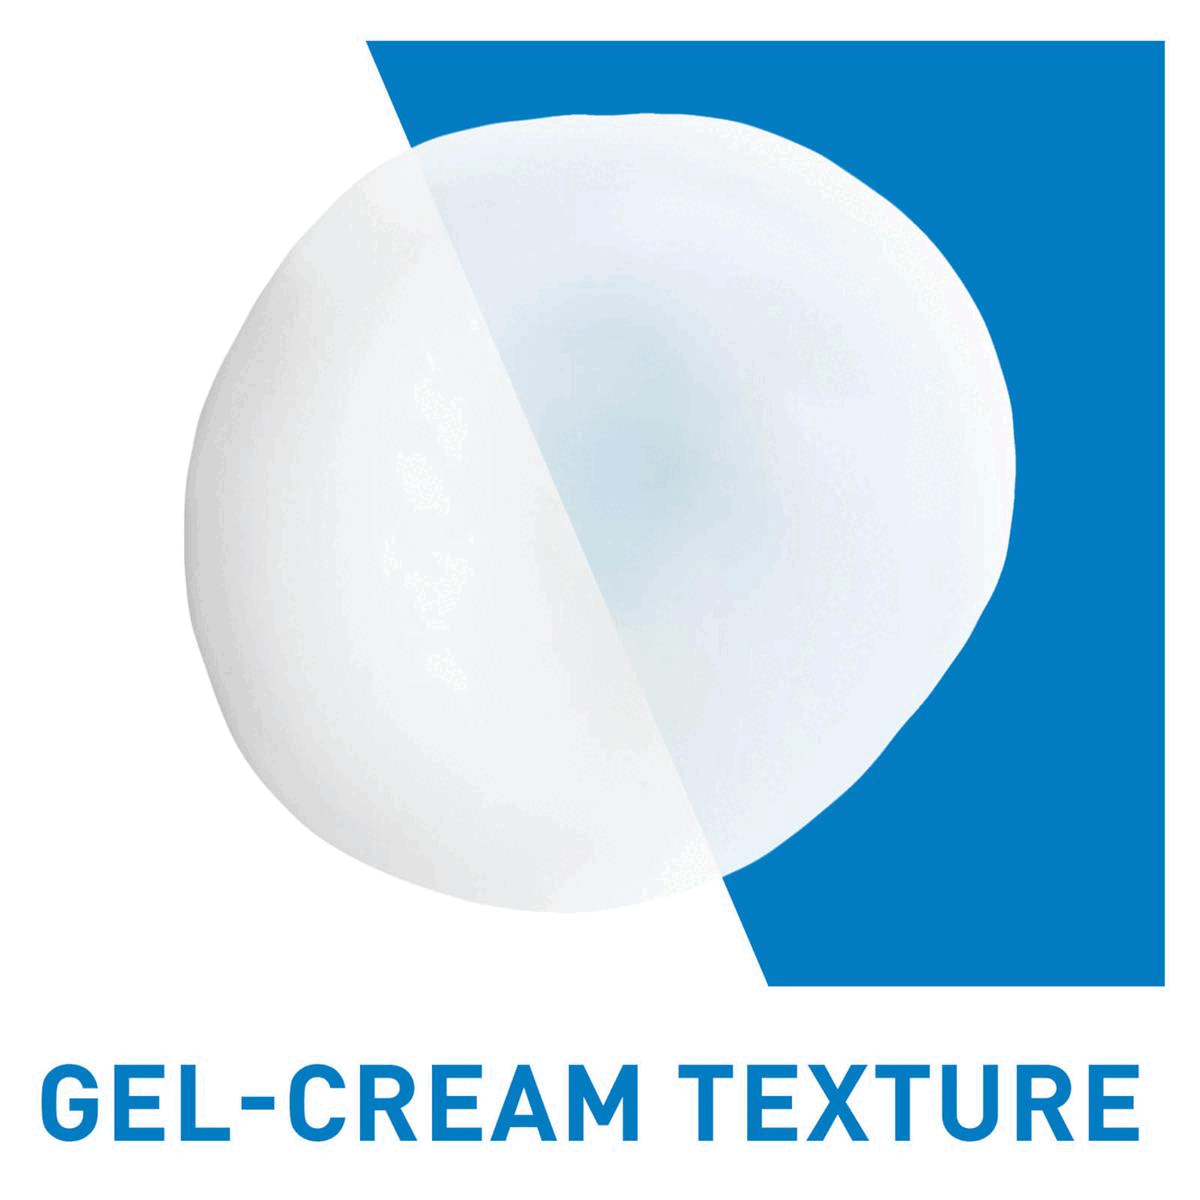 Image 1- gel cream texture Image 2- soft, smooth skin Image 3- ceraVe developed with dermatologists Image 4- hydration with sun protection